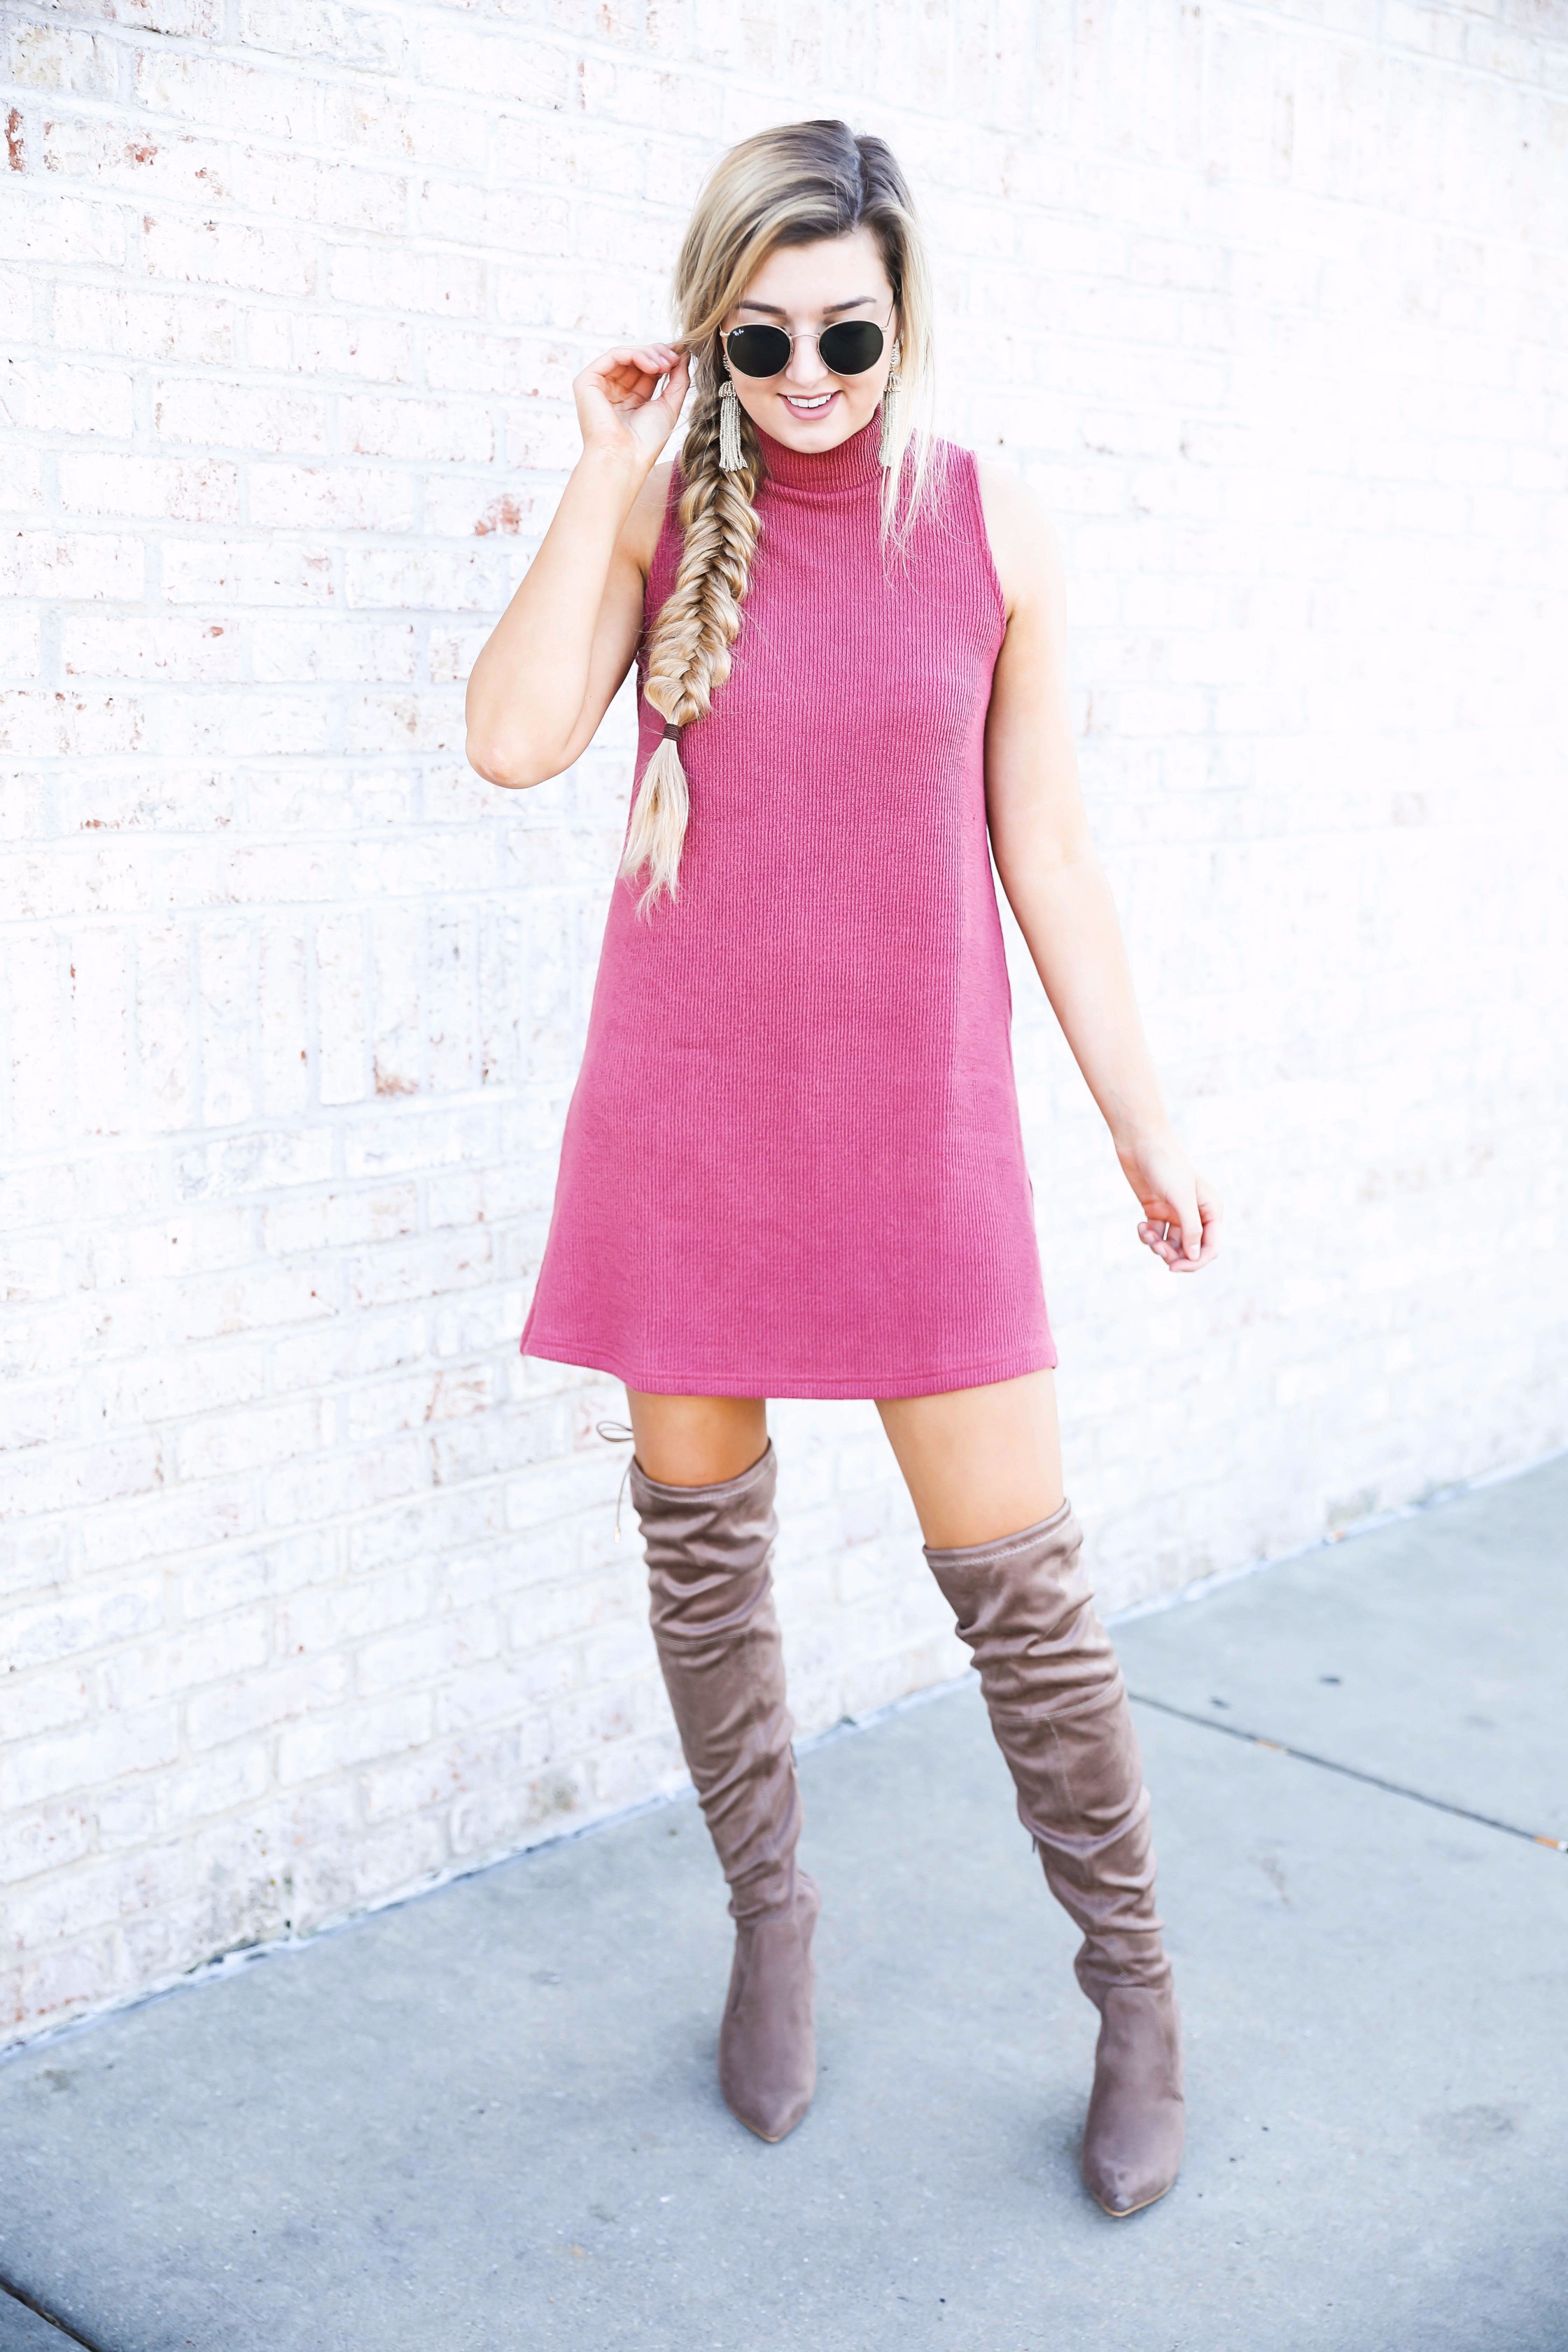 Red Dress Boutique sweater dress paired with suede over the knee boots! Cutest fall look on fashion blog daily dose of charm by lauren lindmark